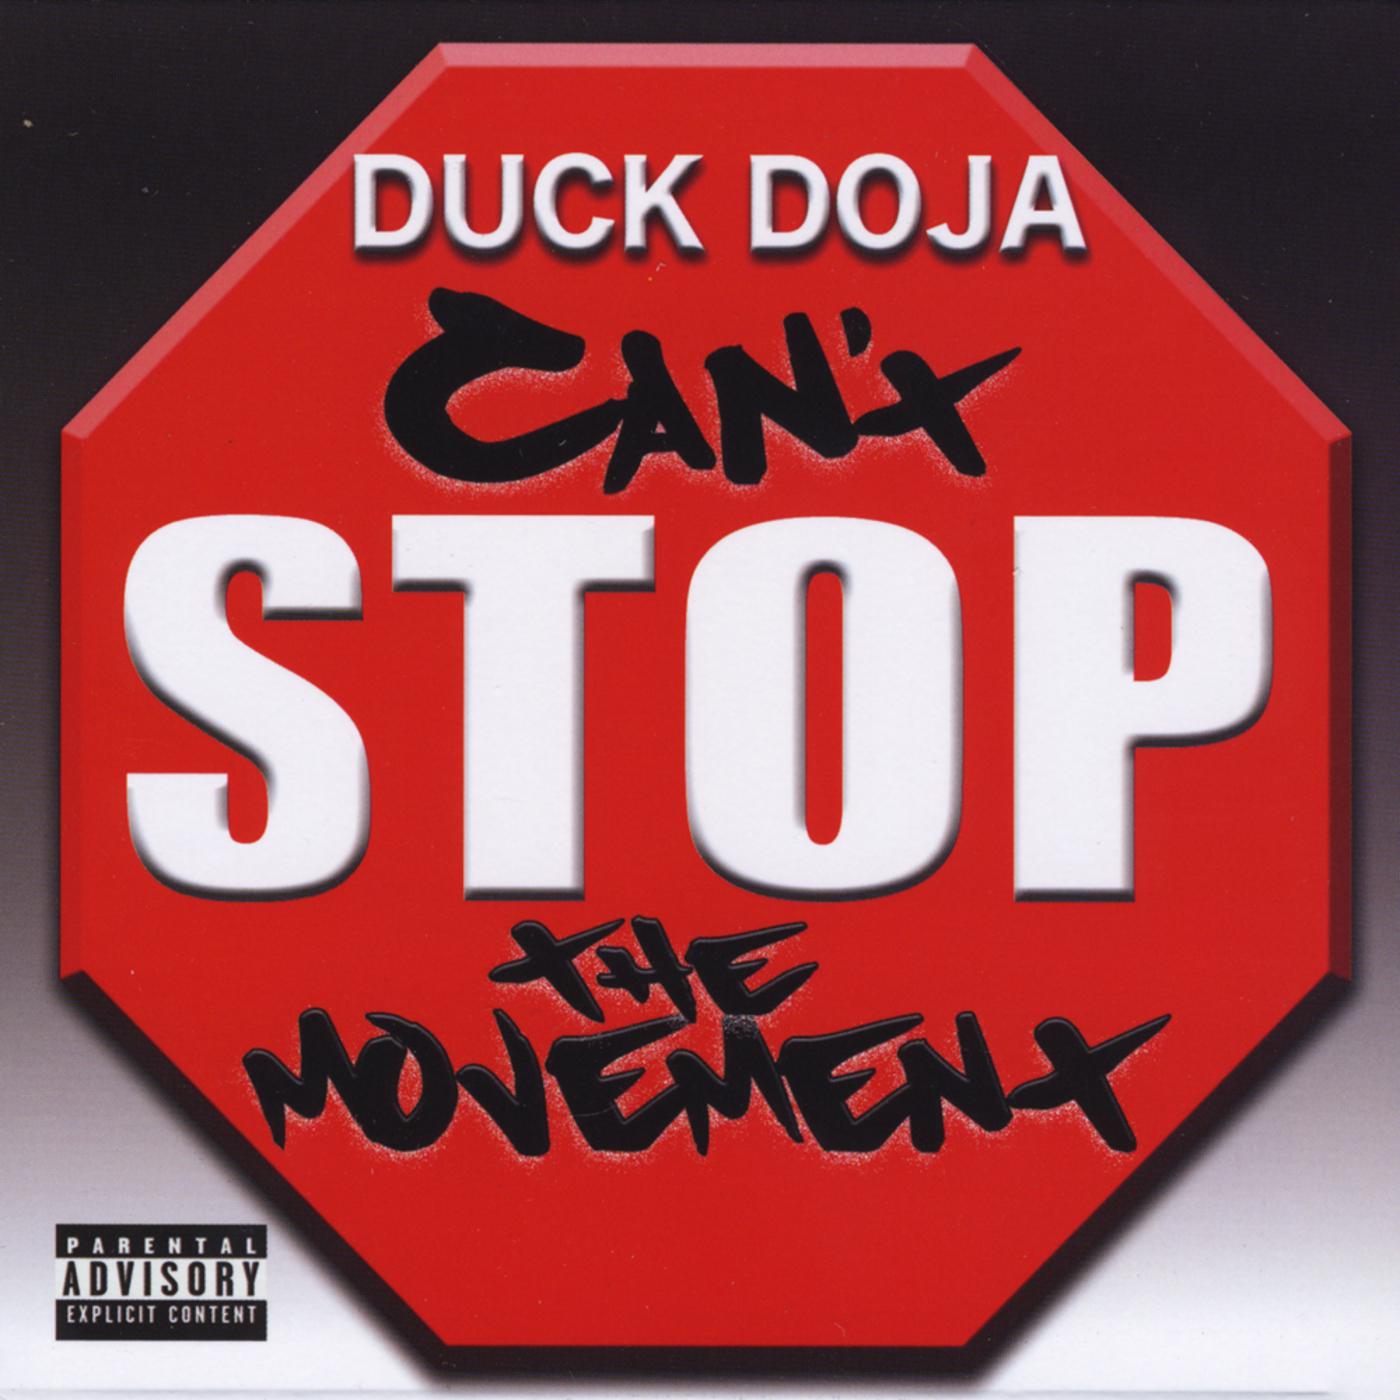 Duck Doja - Can't Stop The Movement